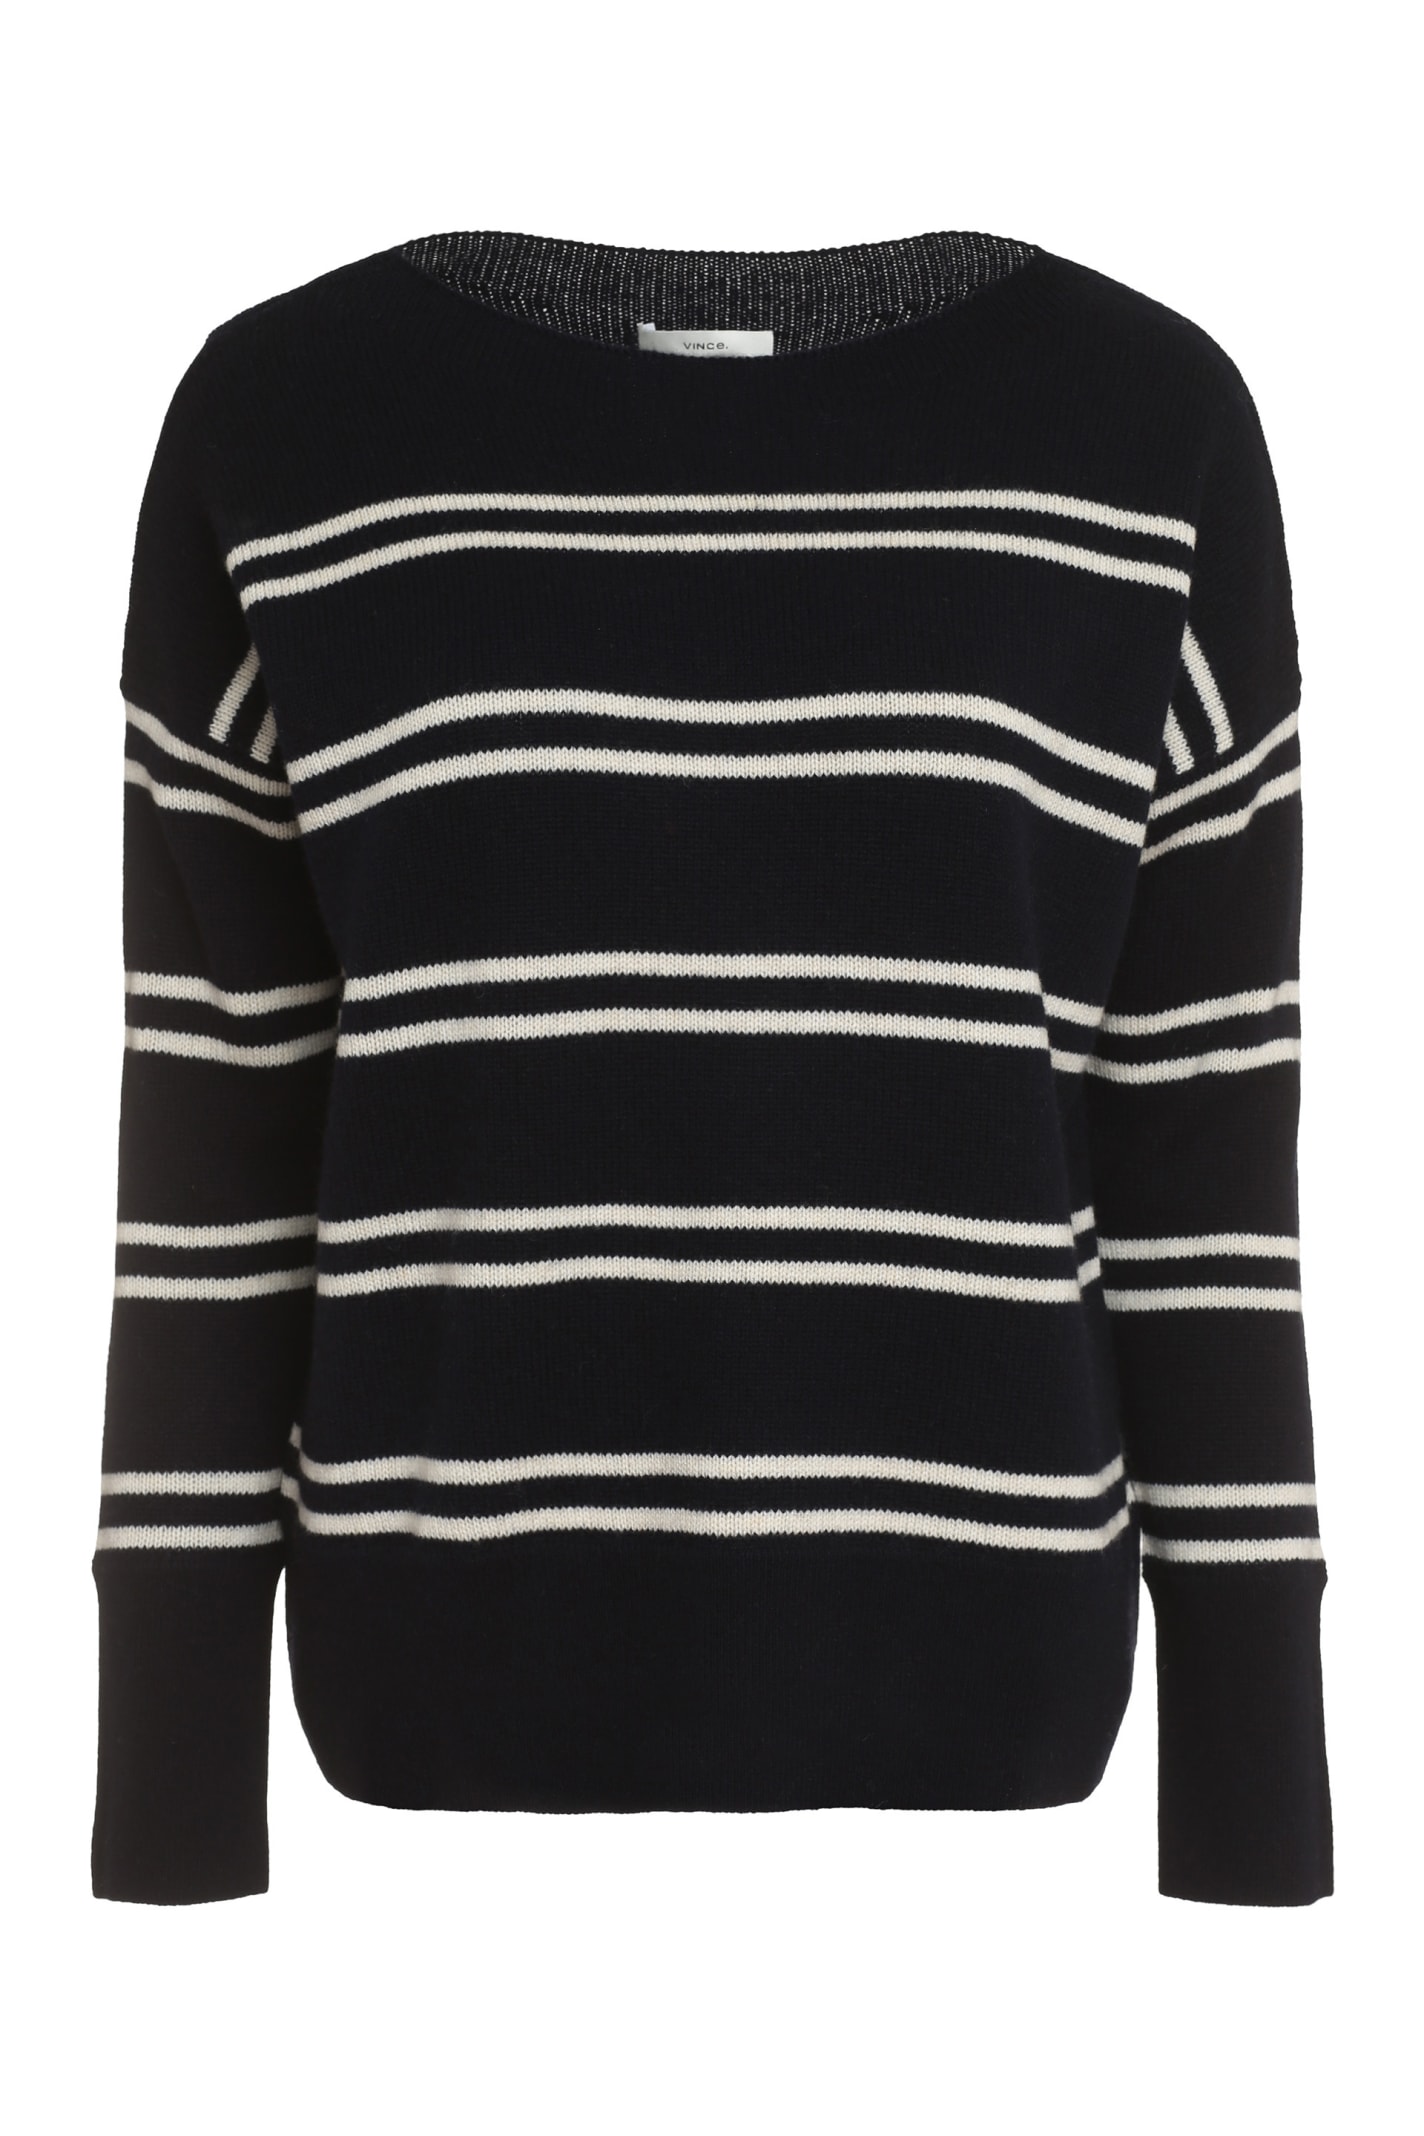 Vince Striped Crew-neck Sweater